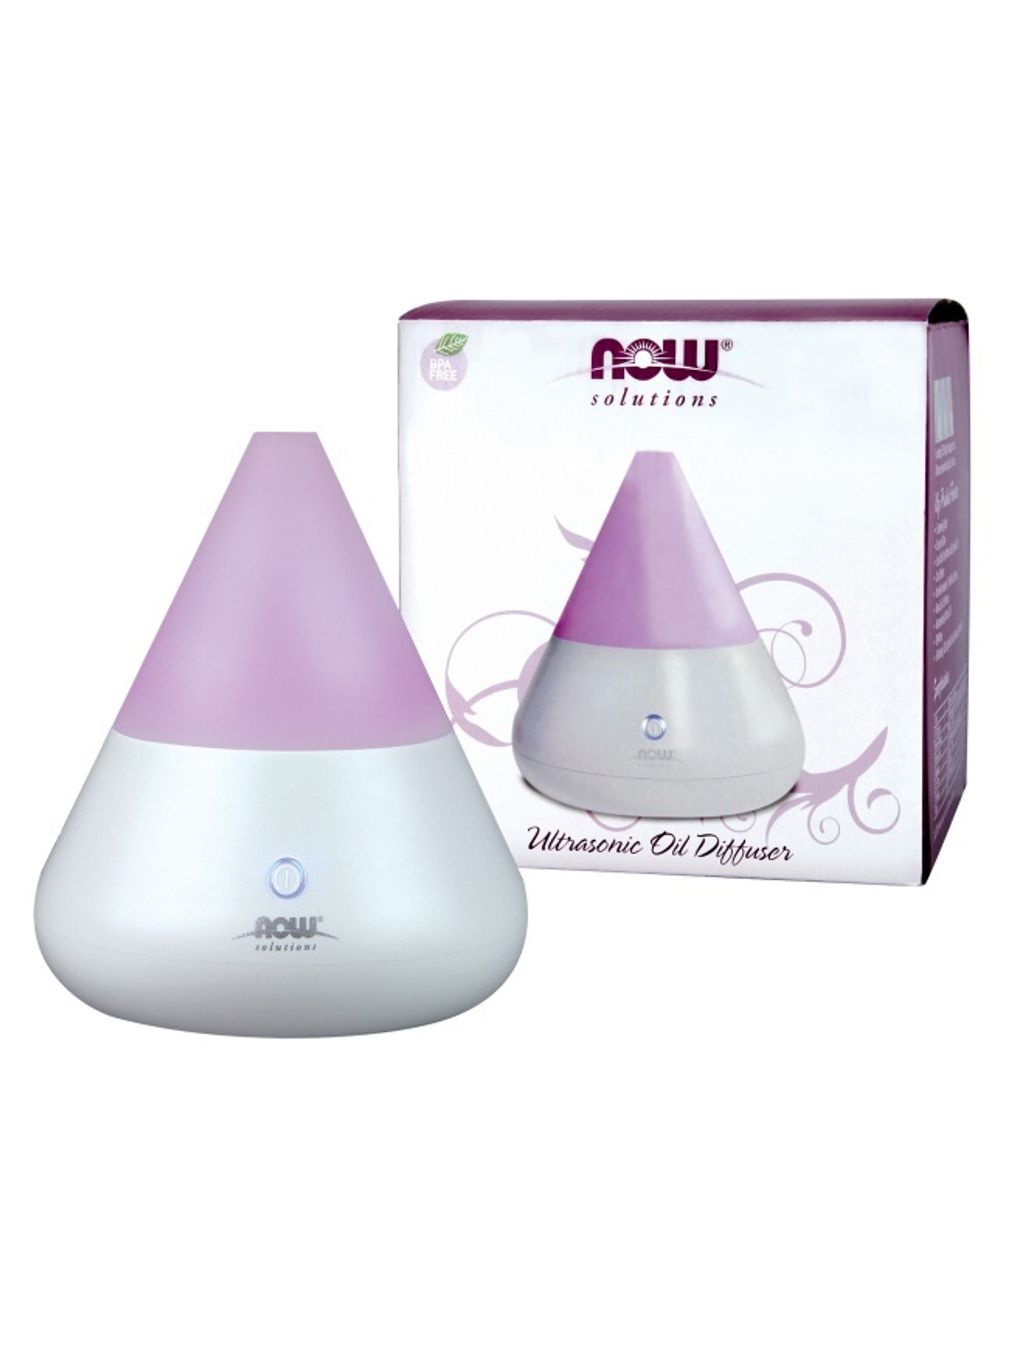 Now Foods Solutions - Ultrasonic Essential Oil Diffuser.jpg